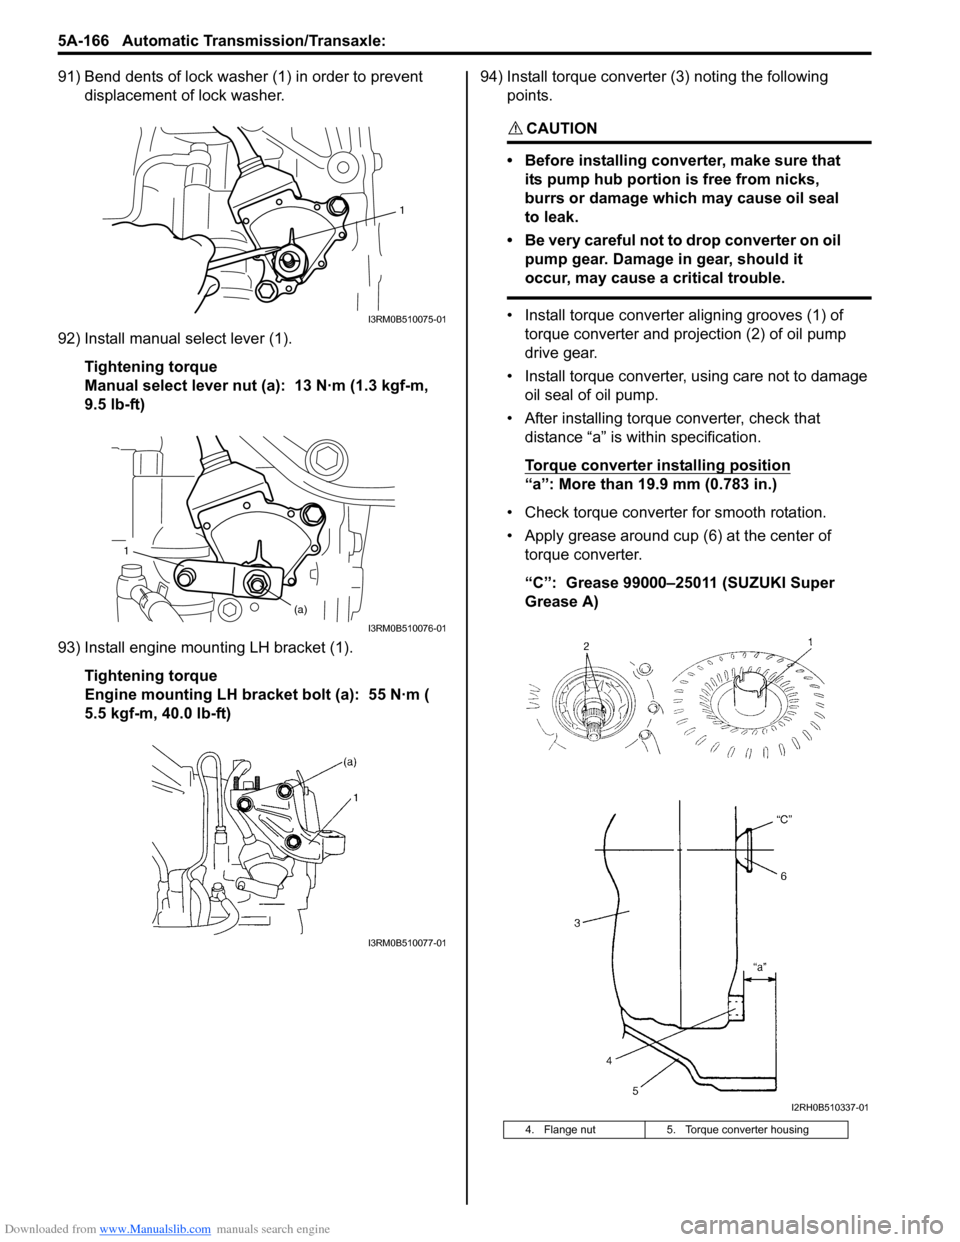 SUZUKI SWIFT 2006 2.G Service Service Manual Downloaded from www.Manualslib.com manuals search engine 5A-166 Automatic Transmission/Transaxle: 
91) Bend dents of lock washer (1) in order to prevent displacement of lock washer.
92) Install manual